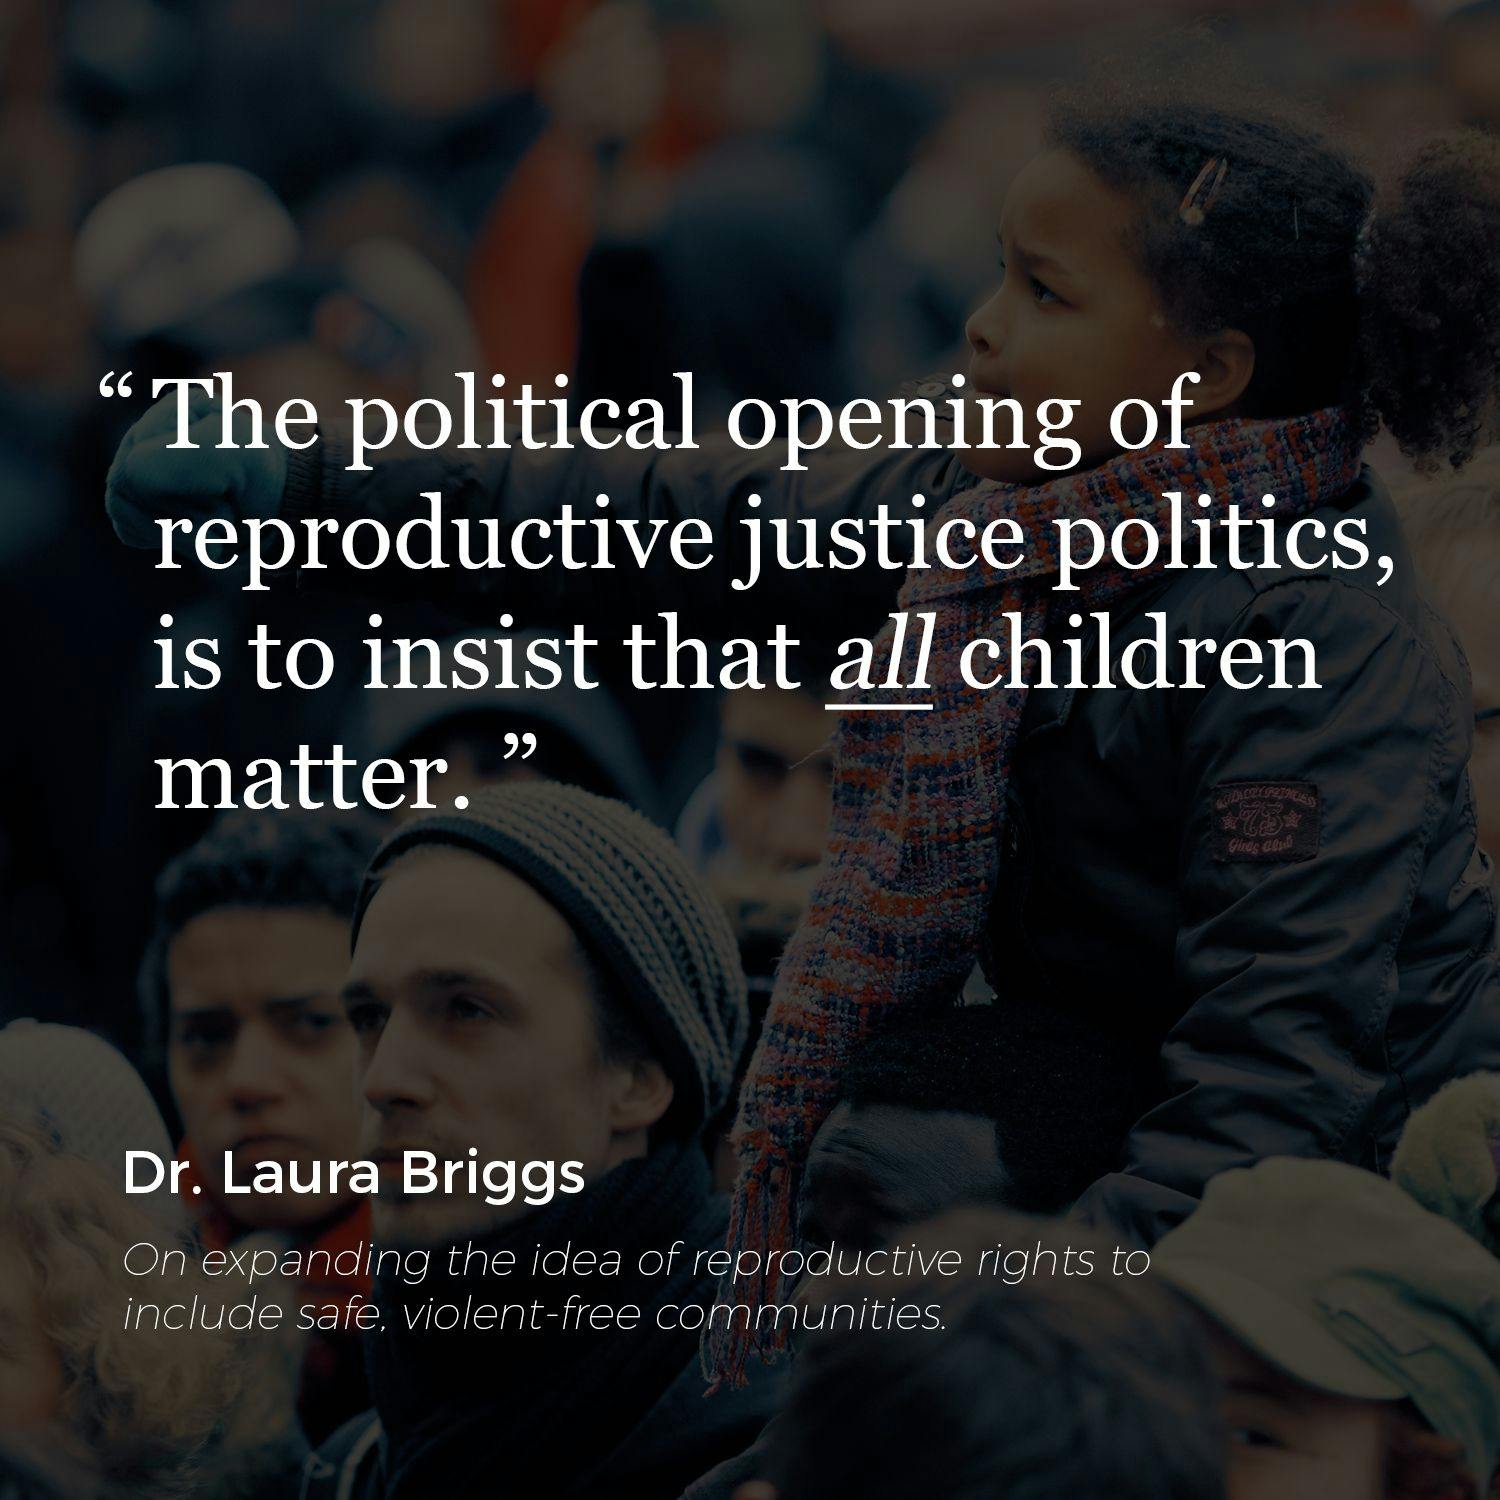 Reproductive Justice & the Politics of Reproductive Rights with Dr. Laura Briggs